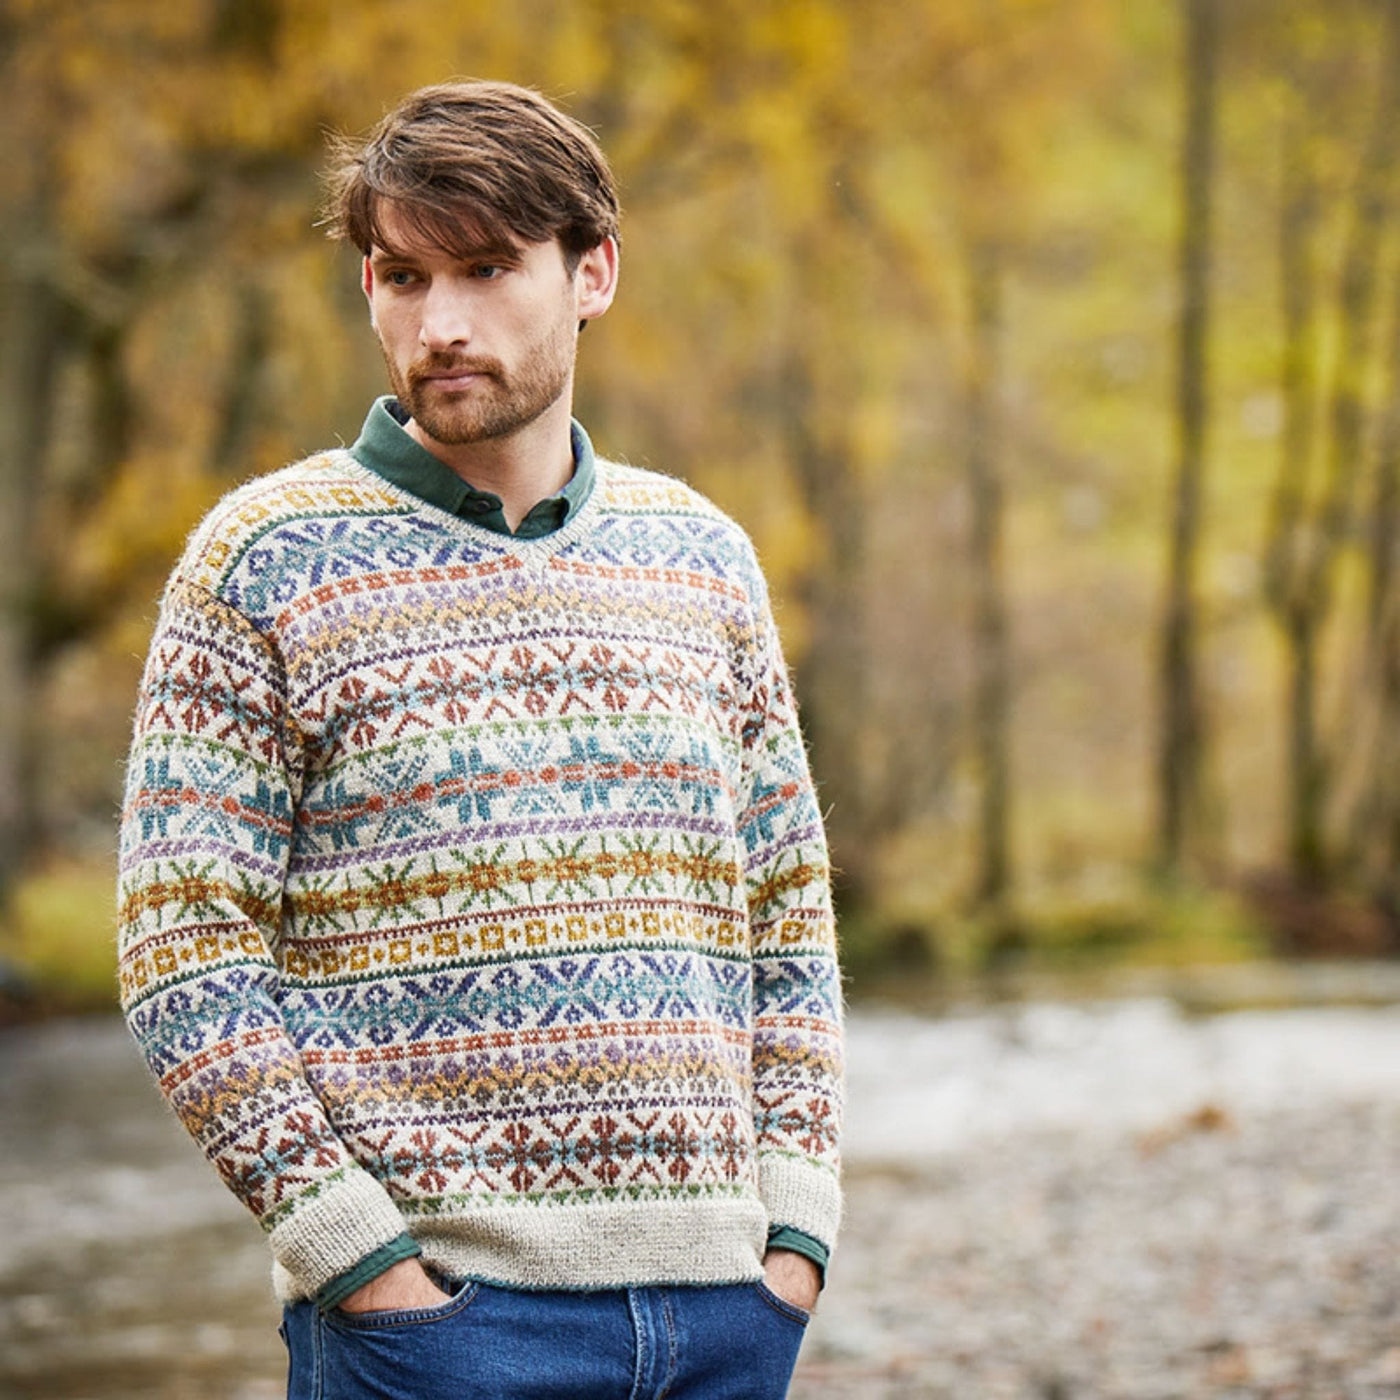 Male model wearing Troutbeck, an allover colorwork sweater designed by Marie Wallin in her new collection, Cumbria. Sweater main color is Raw